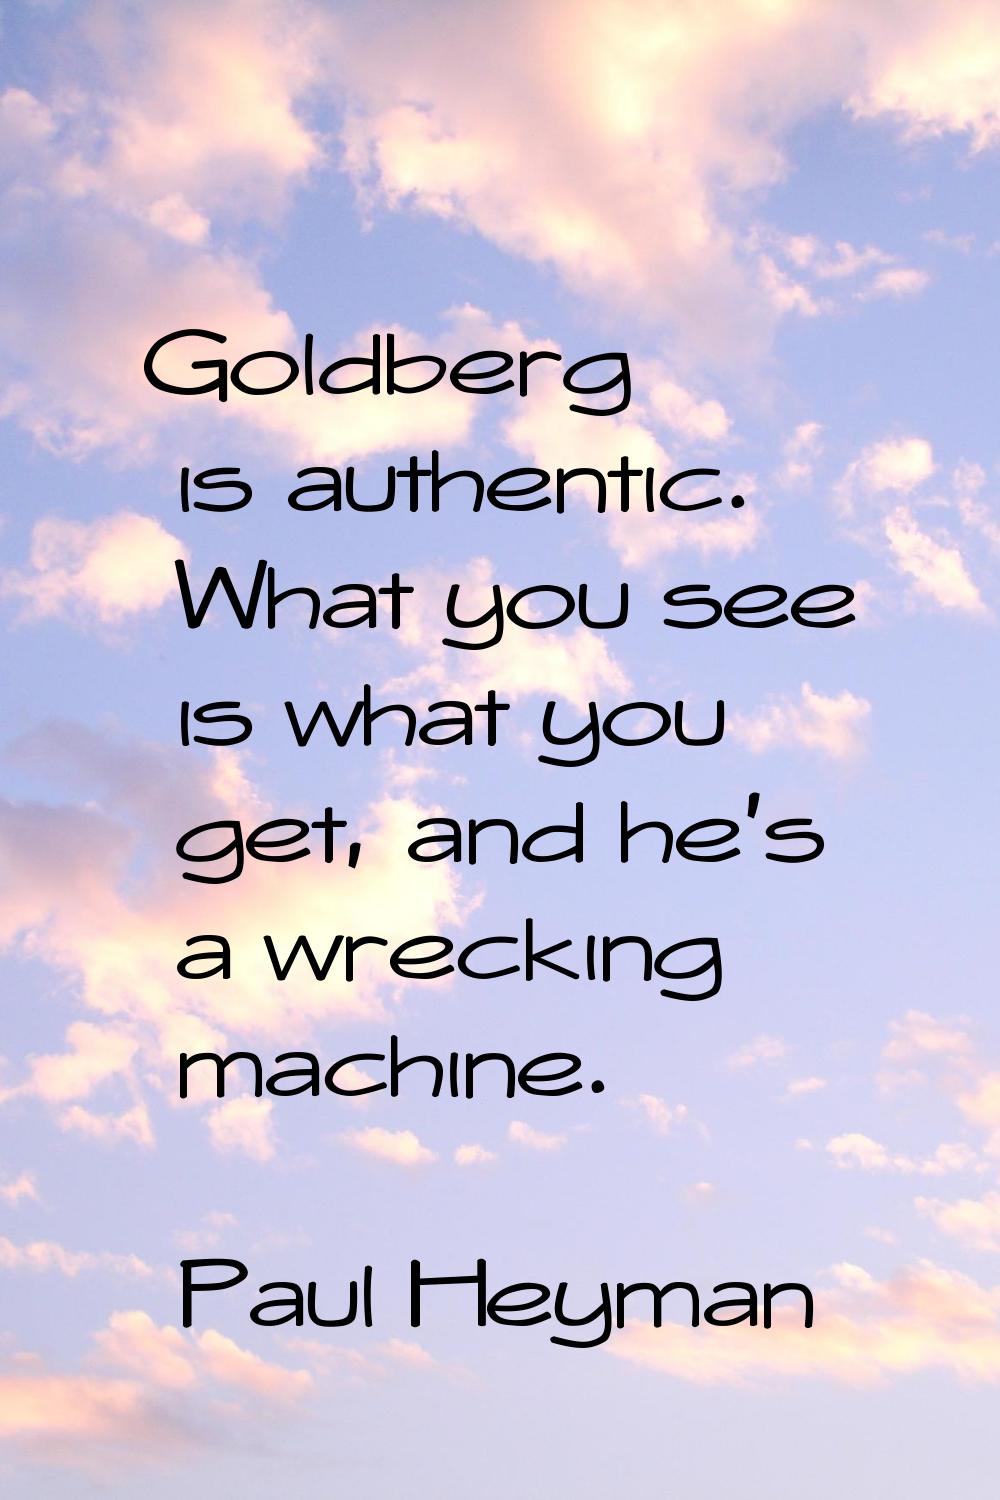 Goldberg is authentic. What you see is what you get, and he's a wrecking machine.